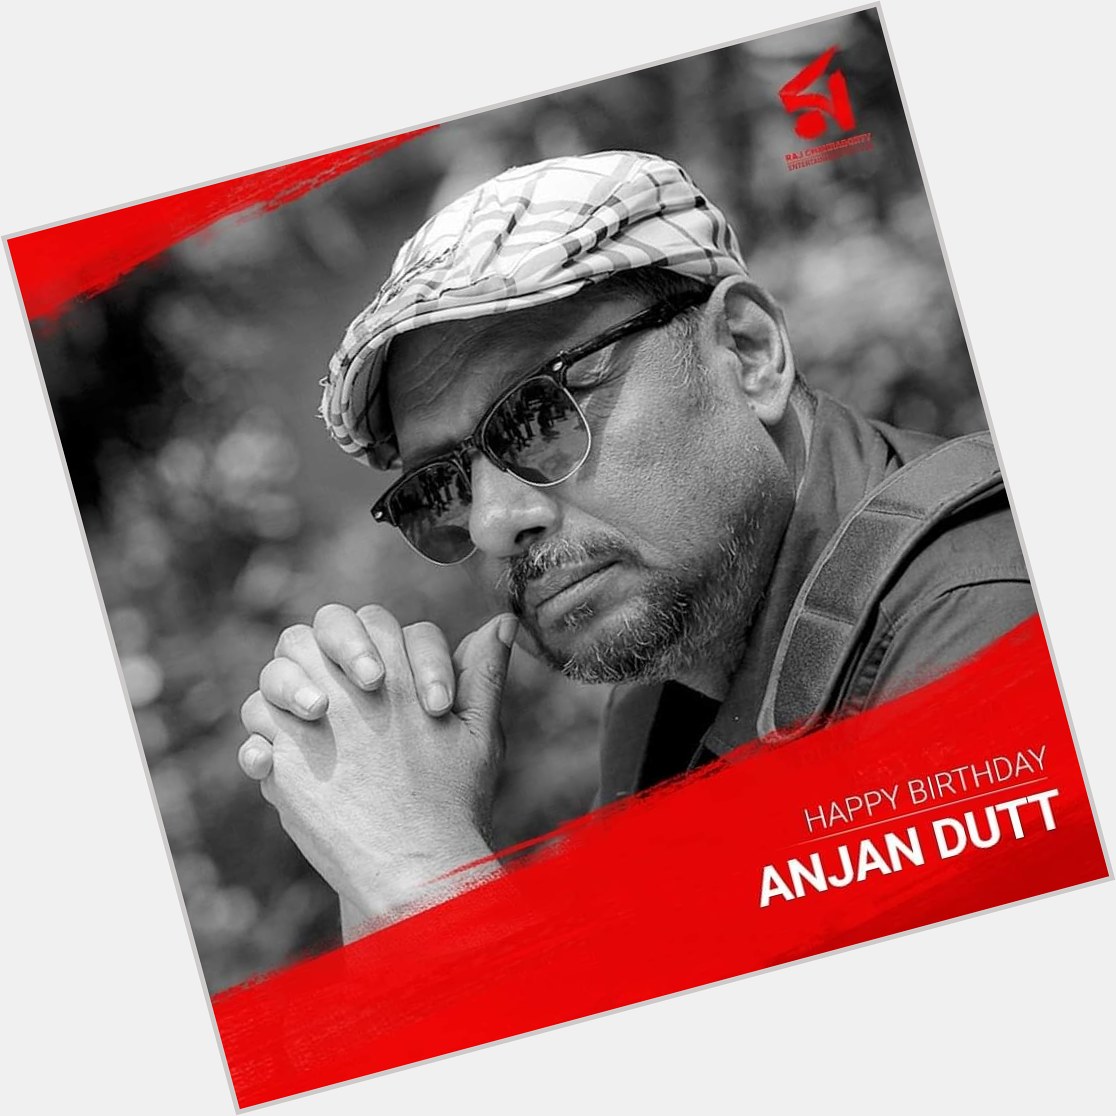 Happy Birthday Anjan Dutt. :)
You are an inspiration. 